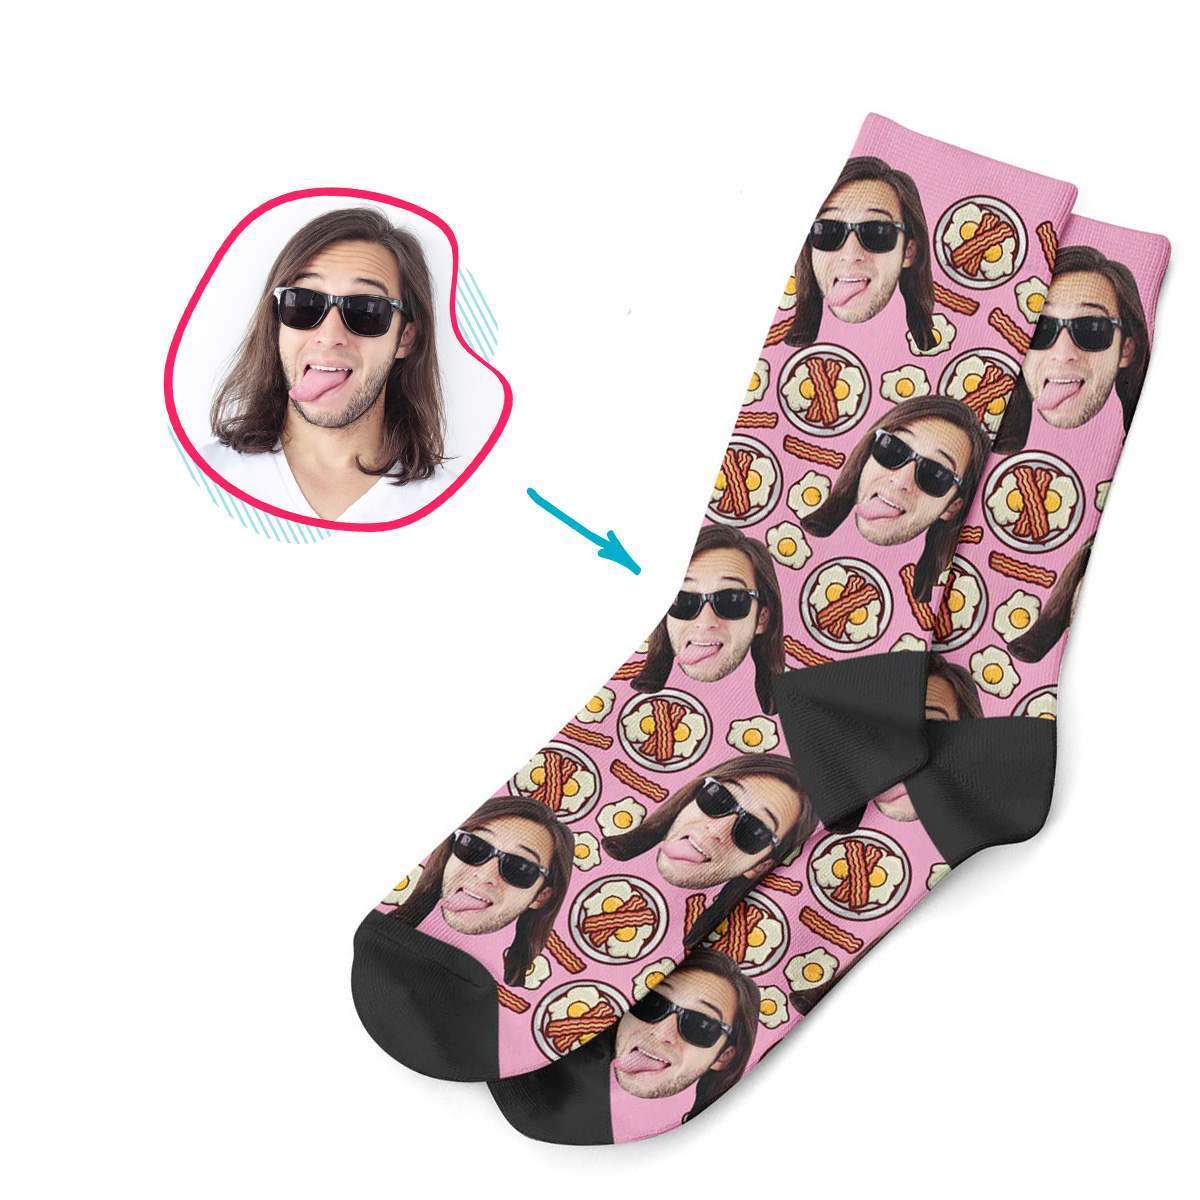 pink Bacon and Eggs socks personalized with photo of face printed on them